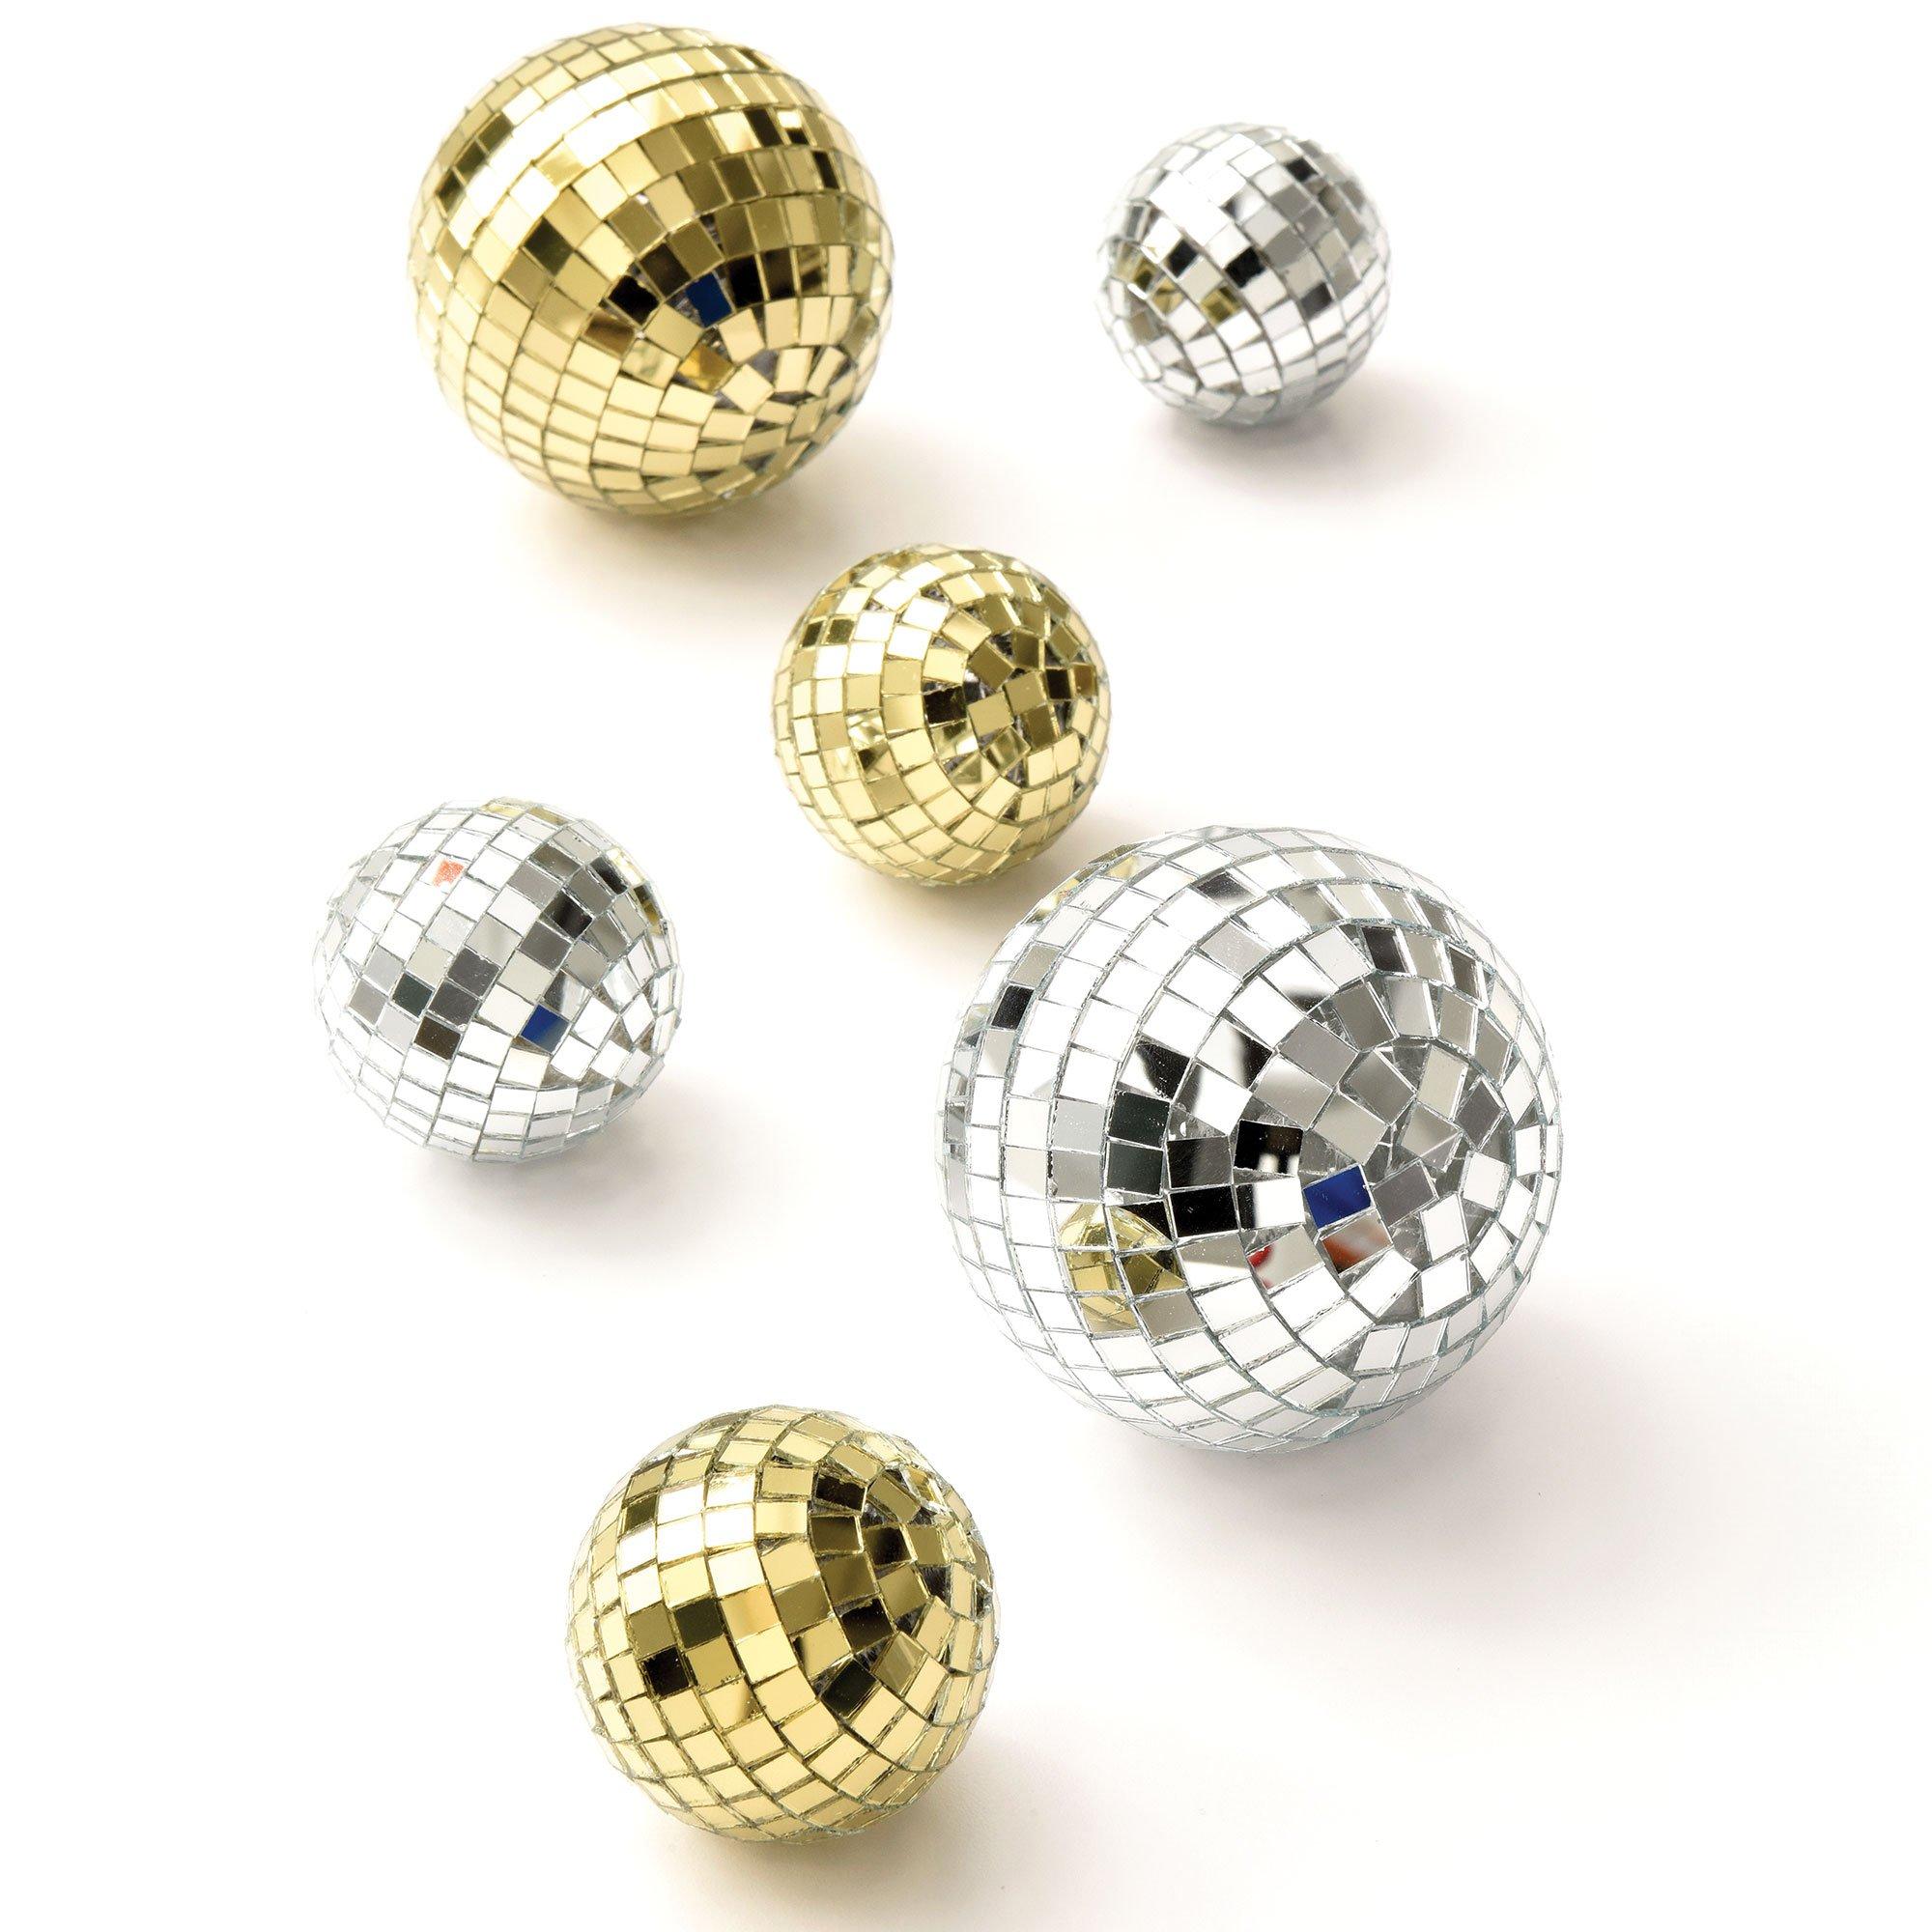 Premium Photo  Disco balls for decorationof a party on pink